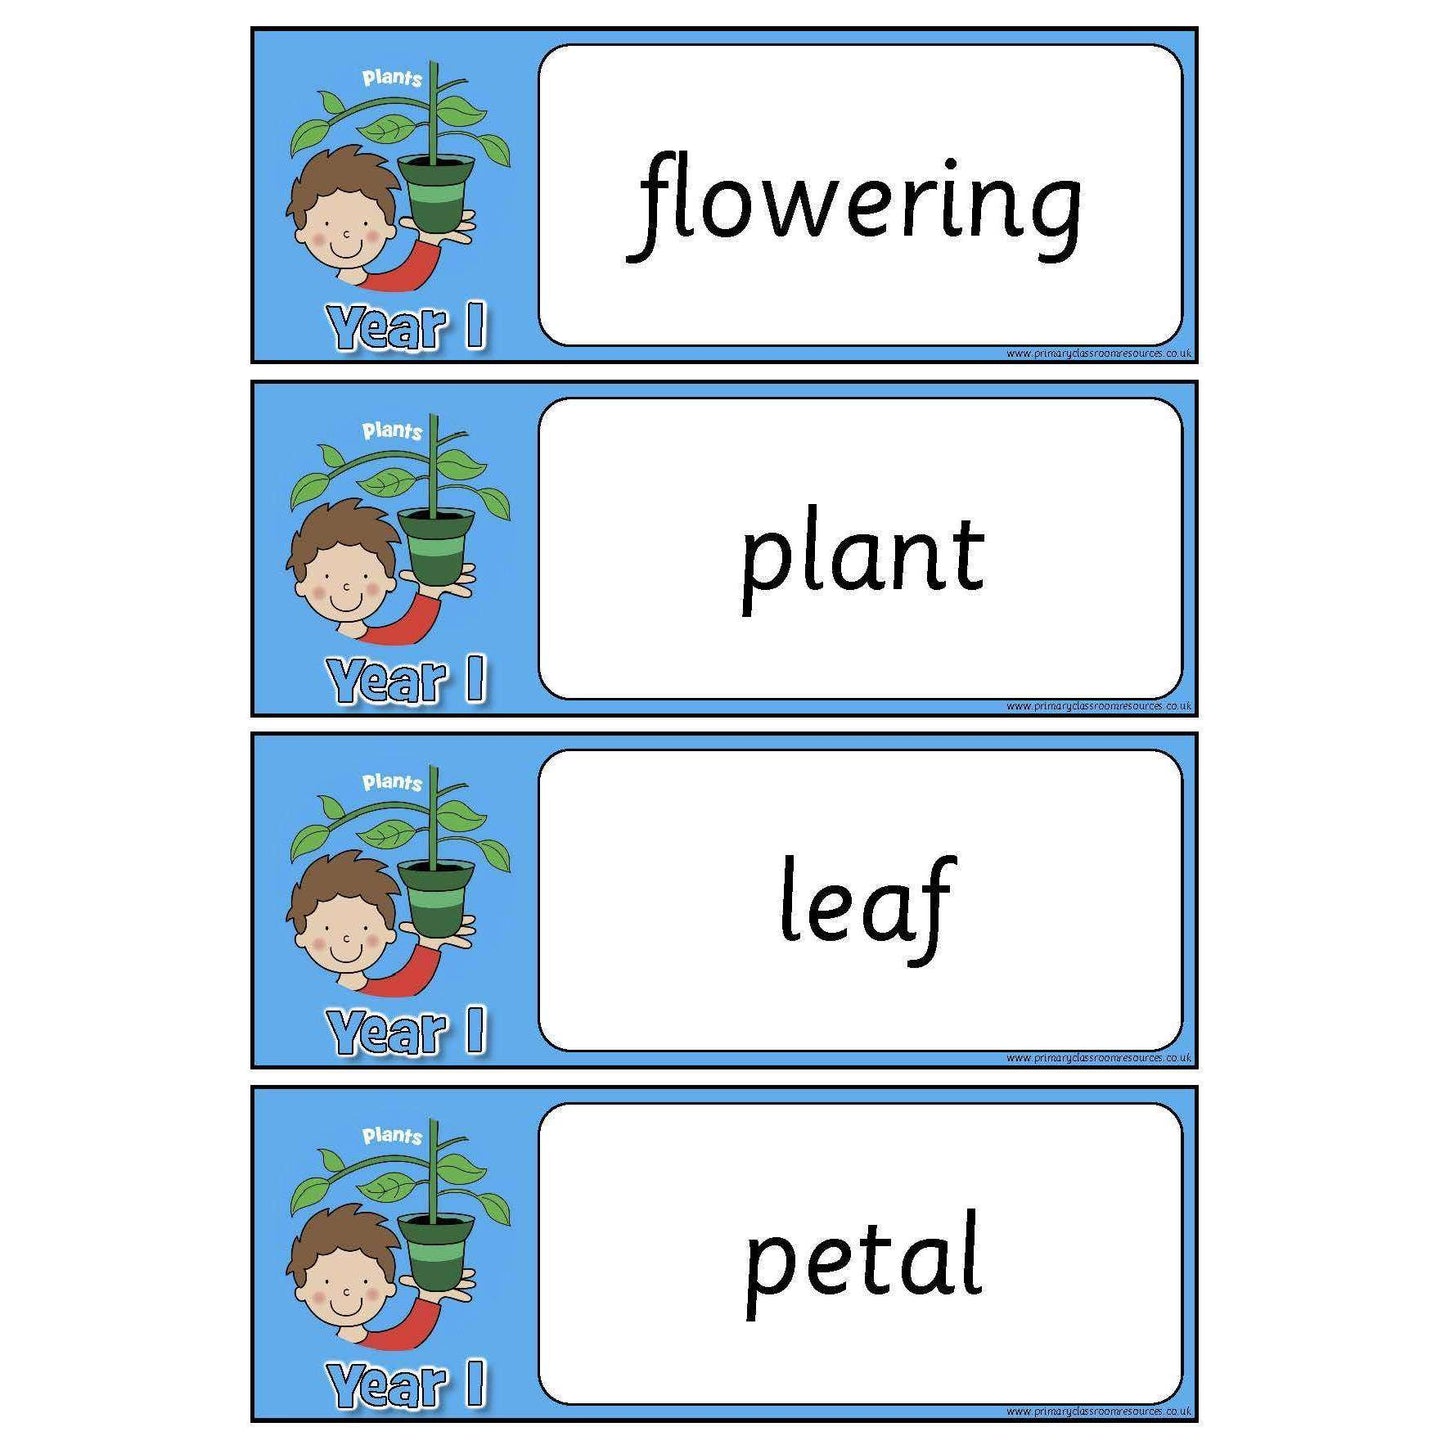 Year 1 Science Vocabulary Pack:Primary Classroom Resources